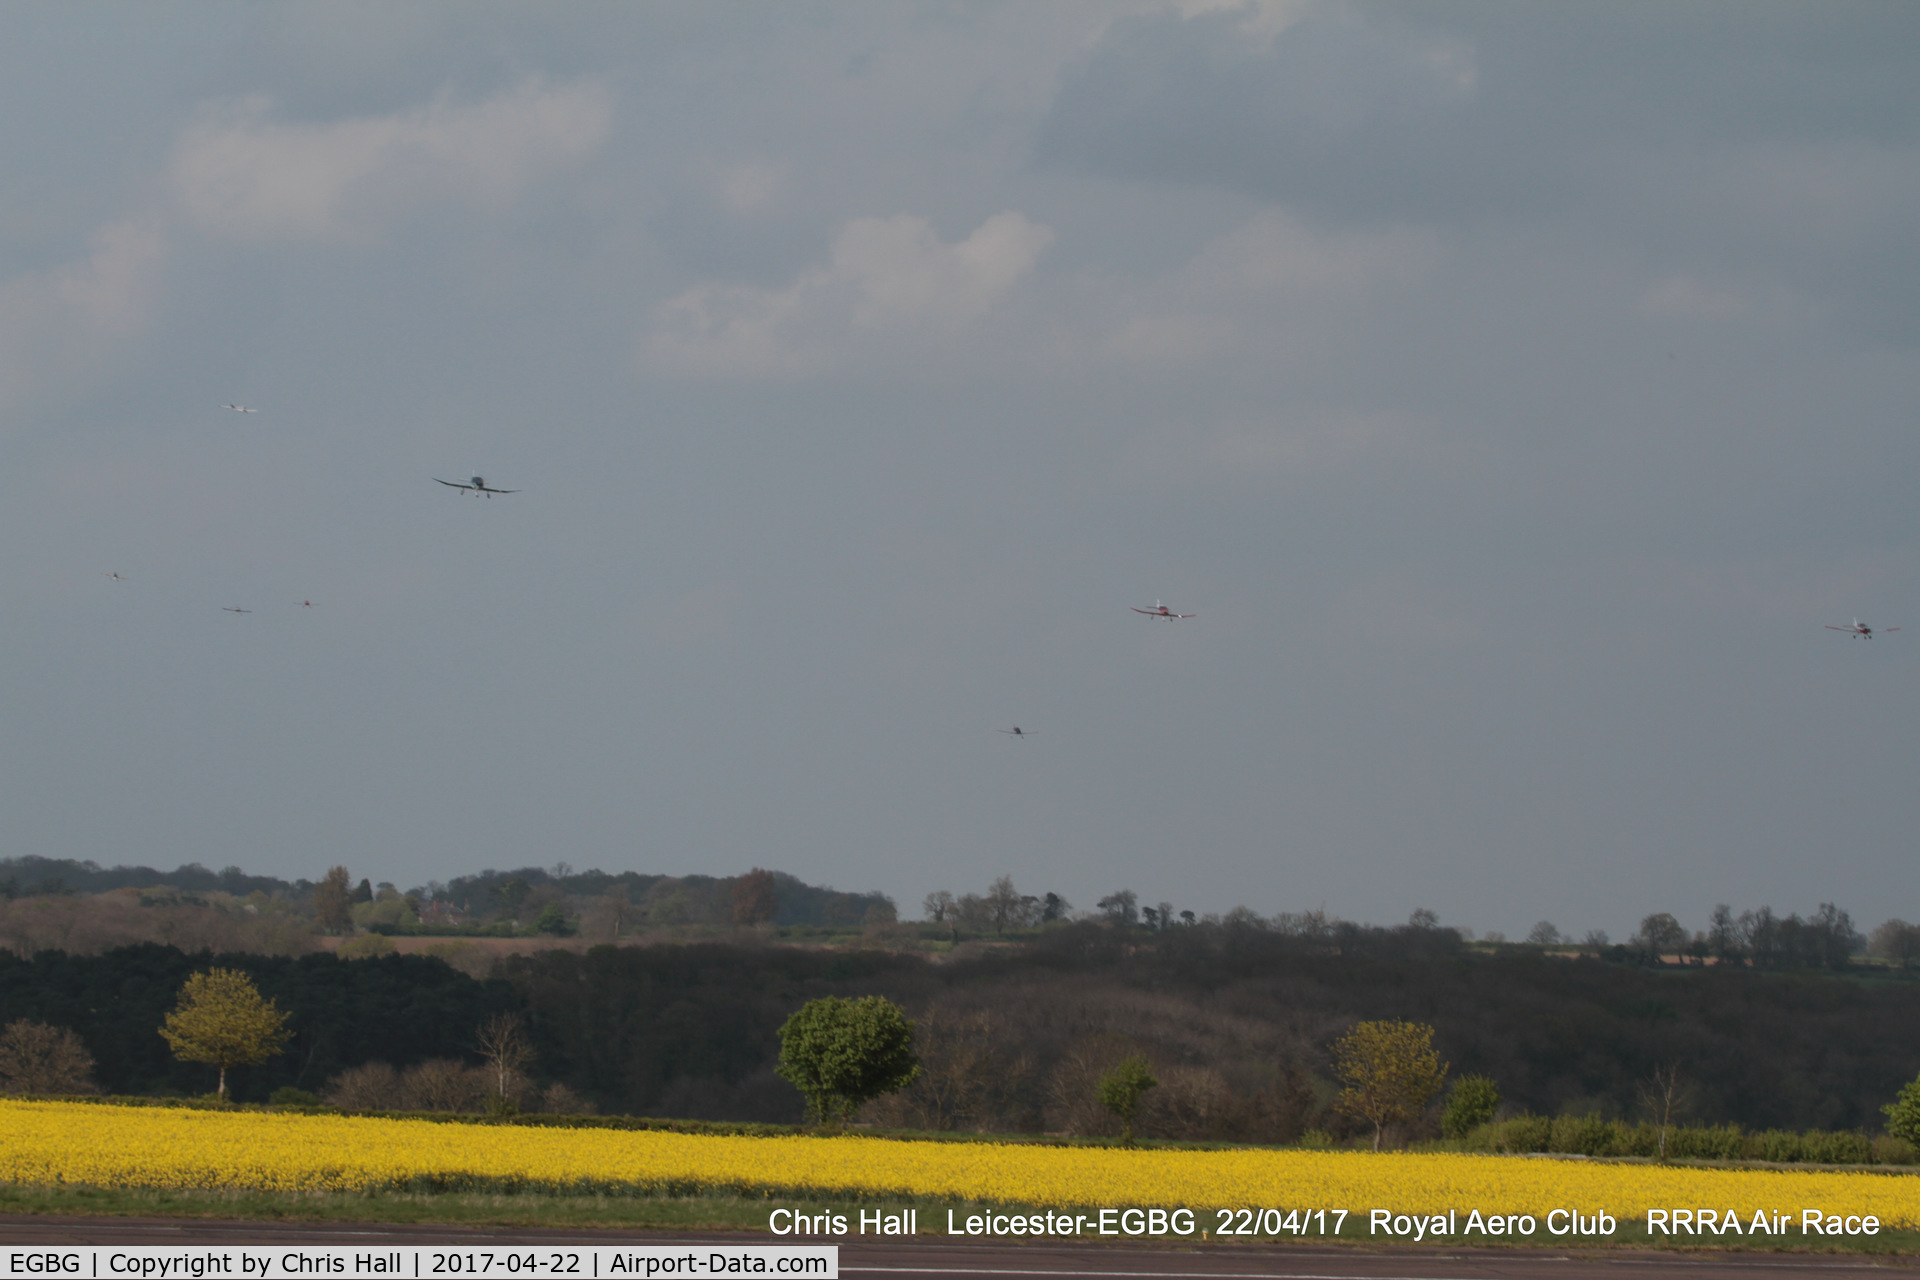 Leicester Airport, Leicester, England United Kingdom (EGBG) - seven aircraft dash for the finish line in the Royal Aero Club 3R's air race at Leicester